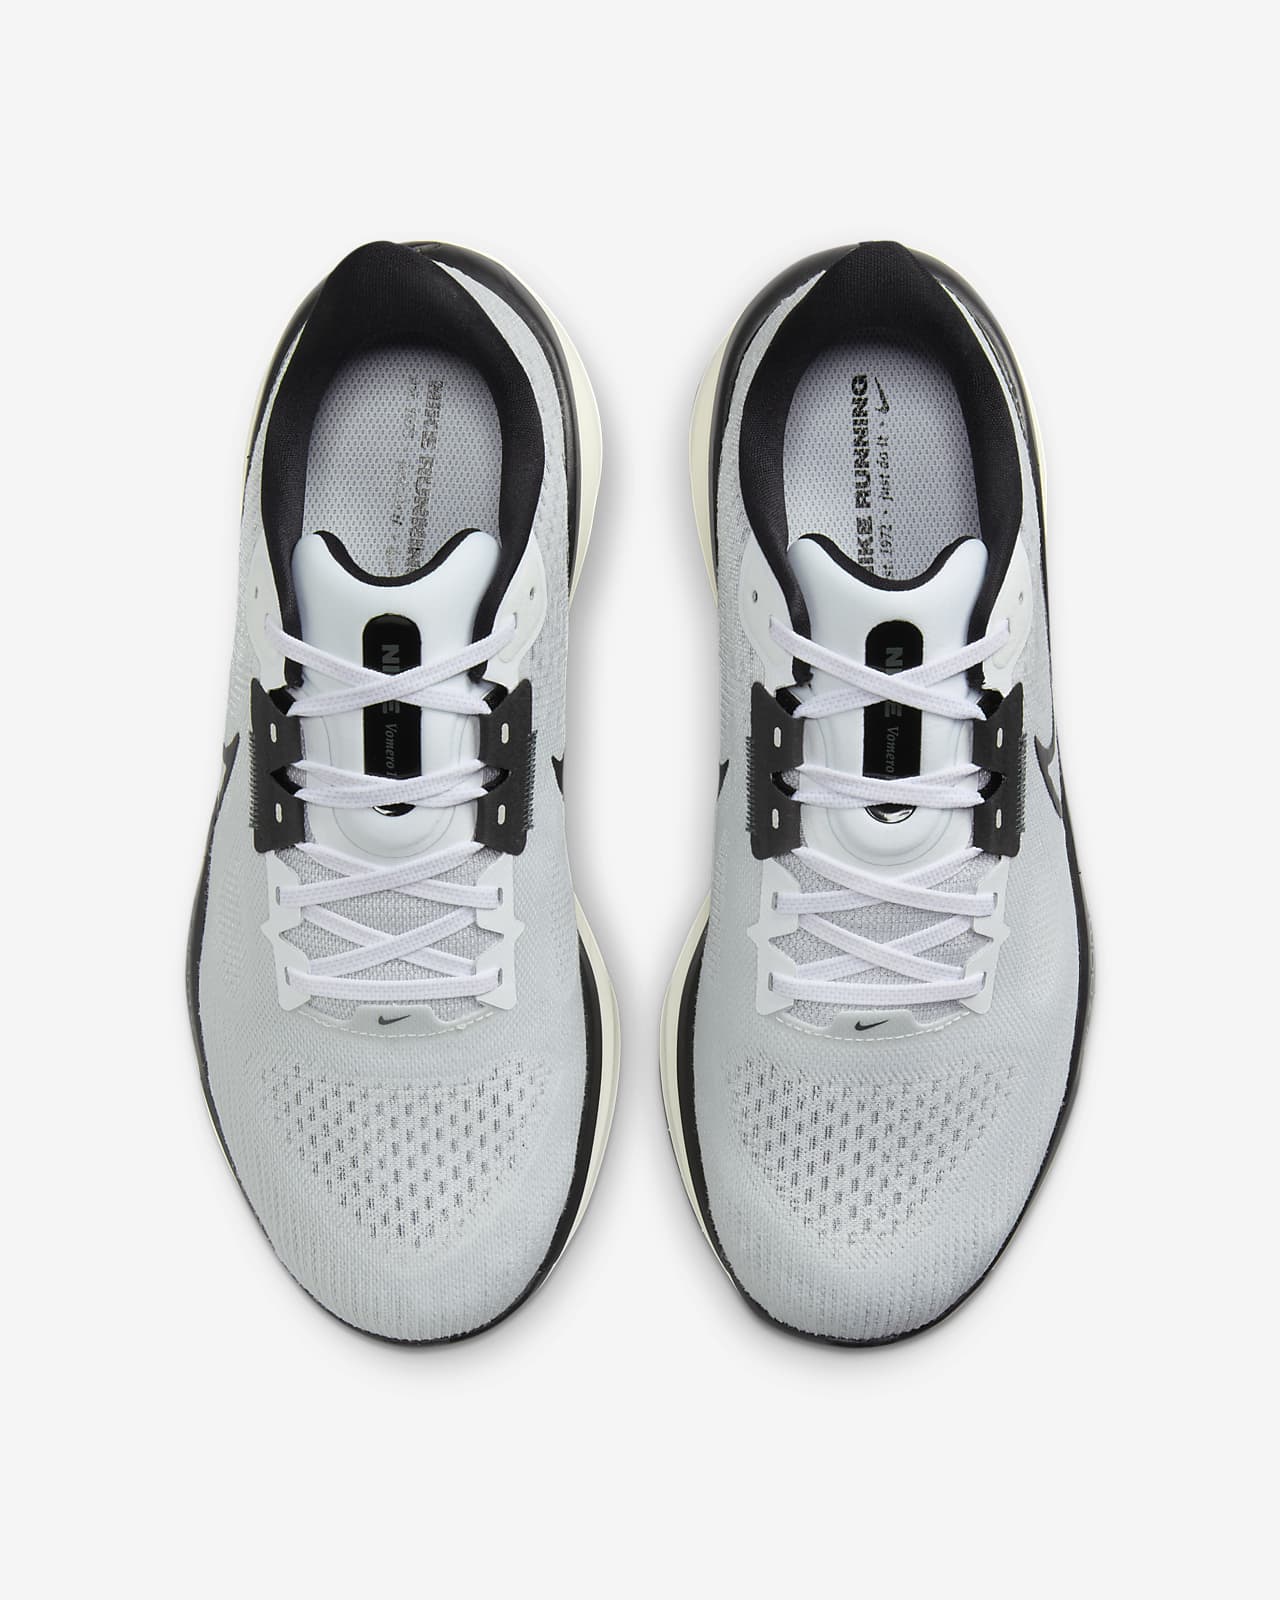 Nike Vomero 17 Men's Road Running Shoes (Extra Wide). Nike.com